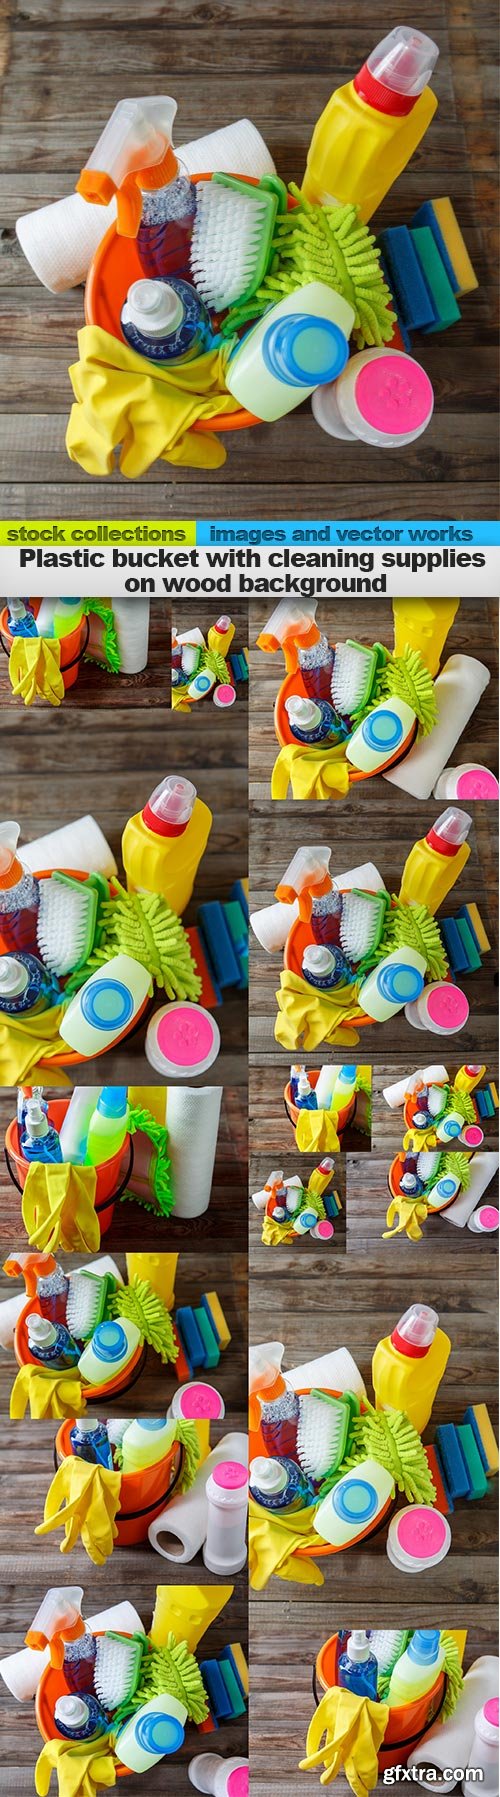 Plastic bucket with cleaning supplies on wood background, 15 x UHQ JPEG